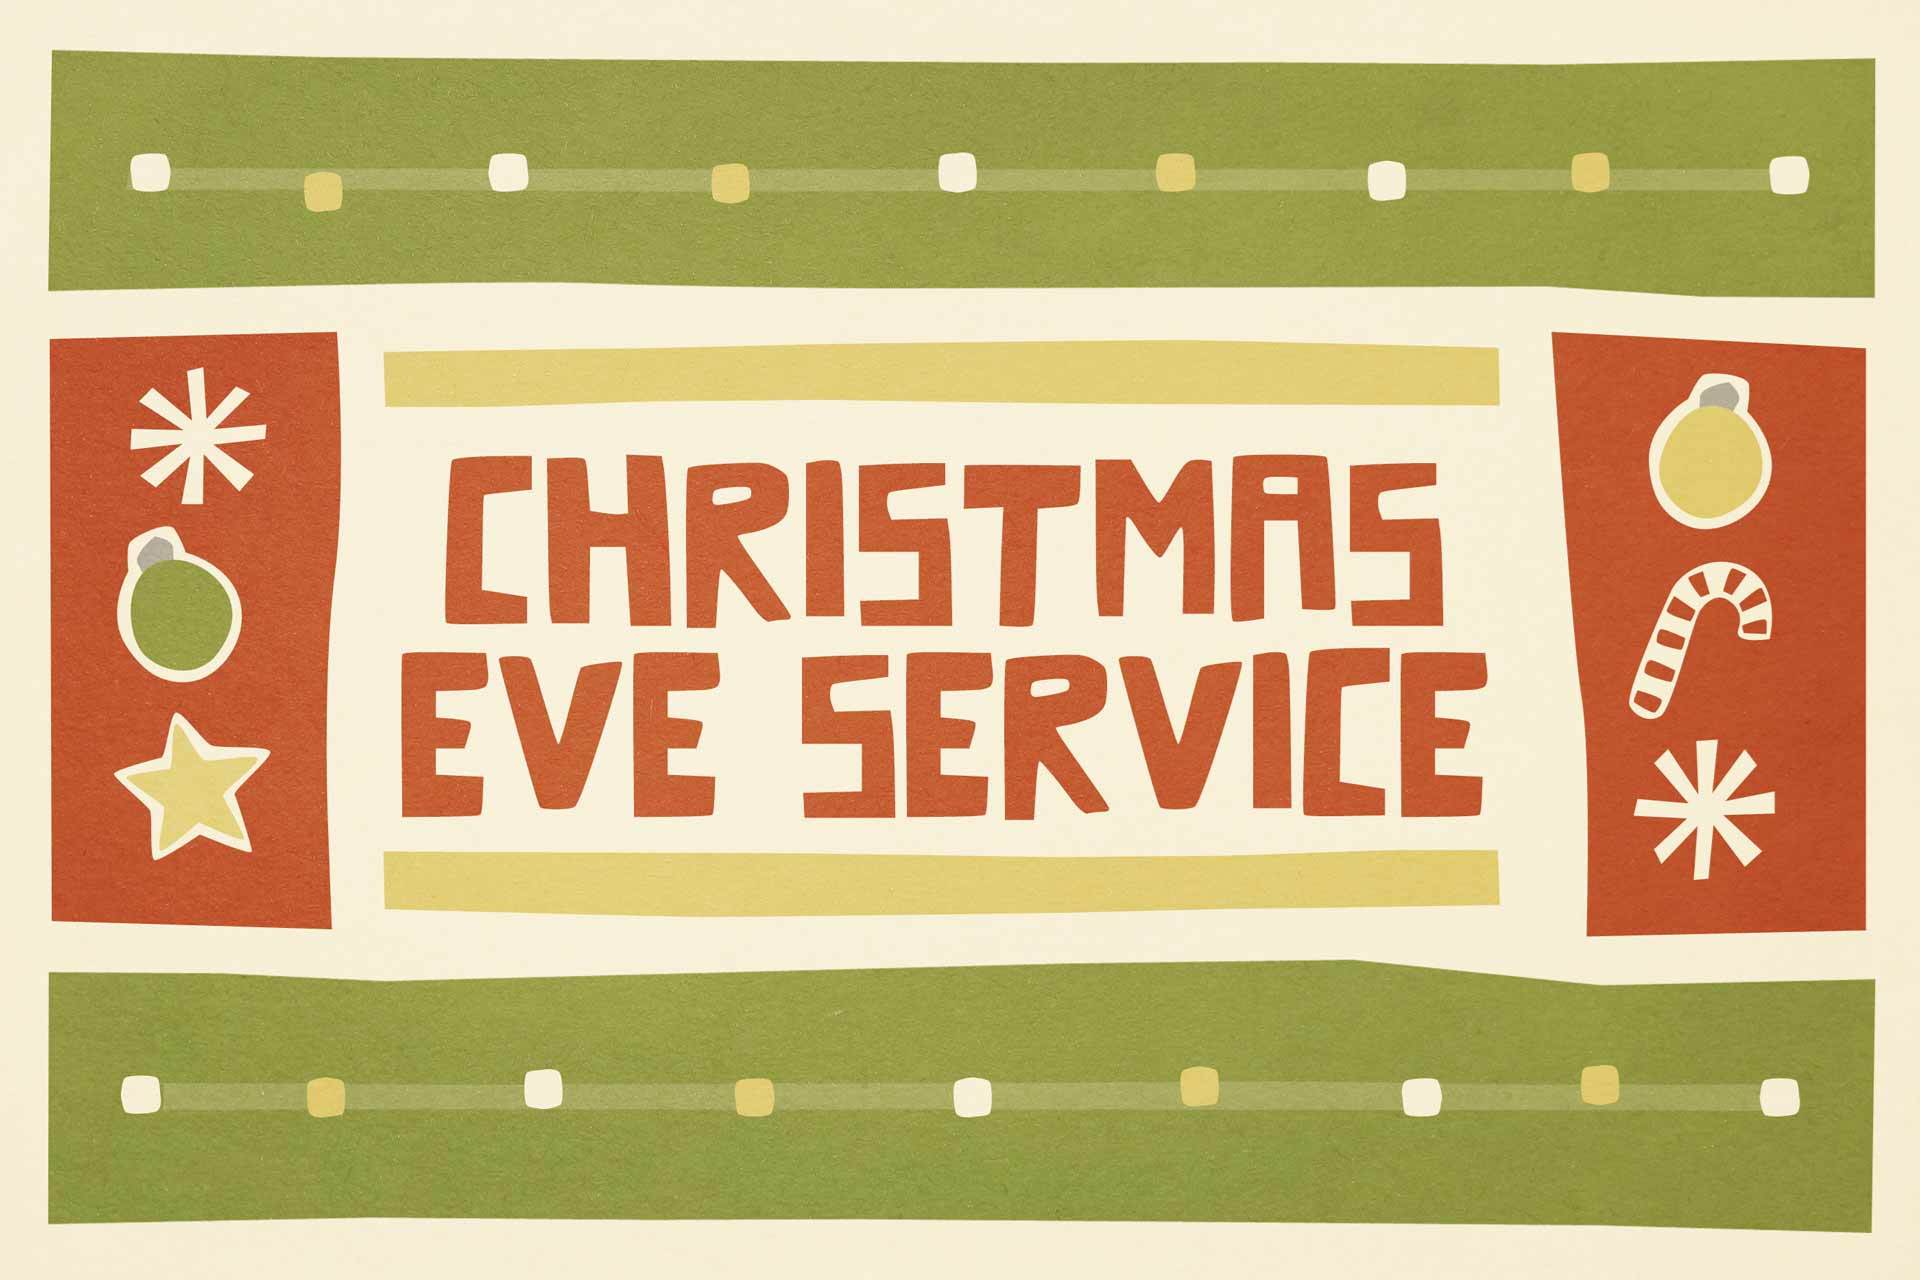 Link to Christmas Eve Service detail page